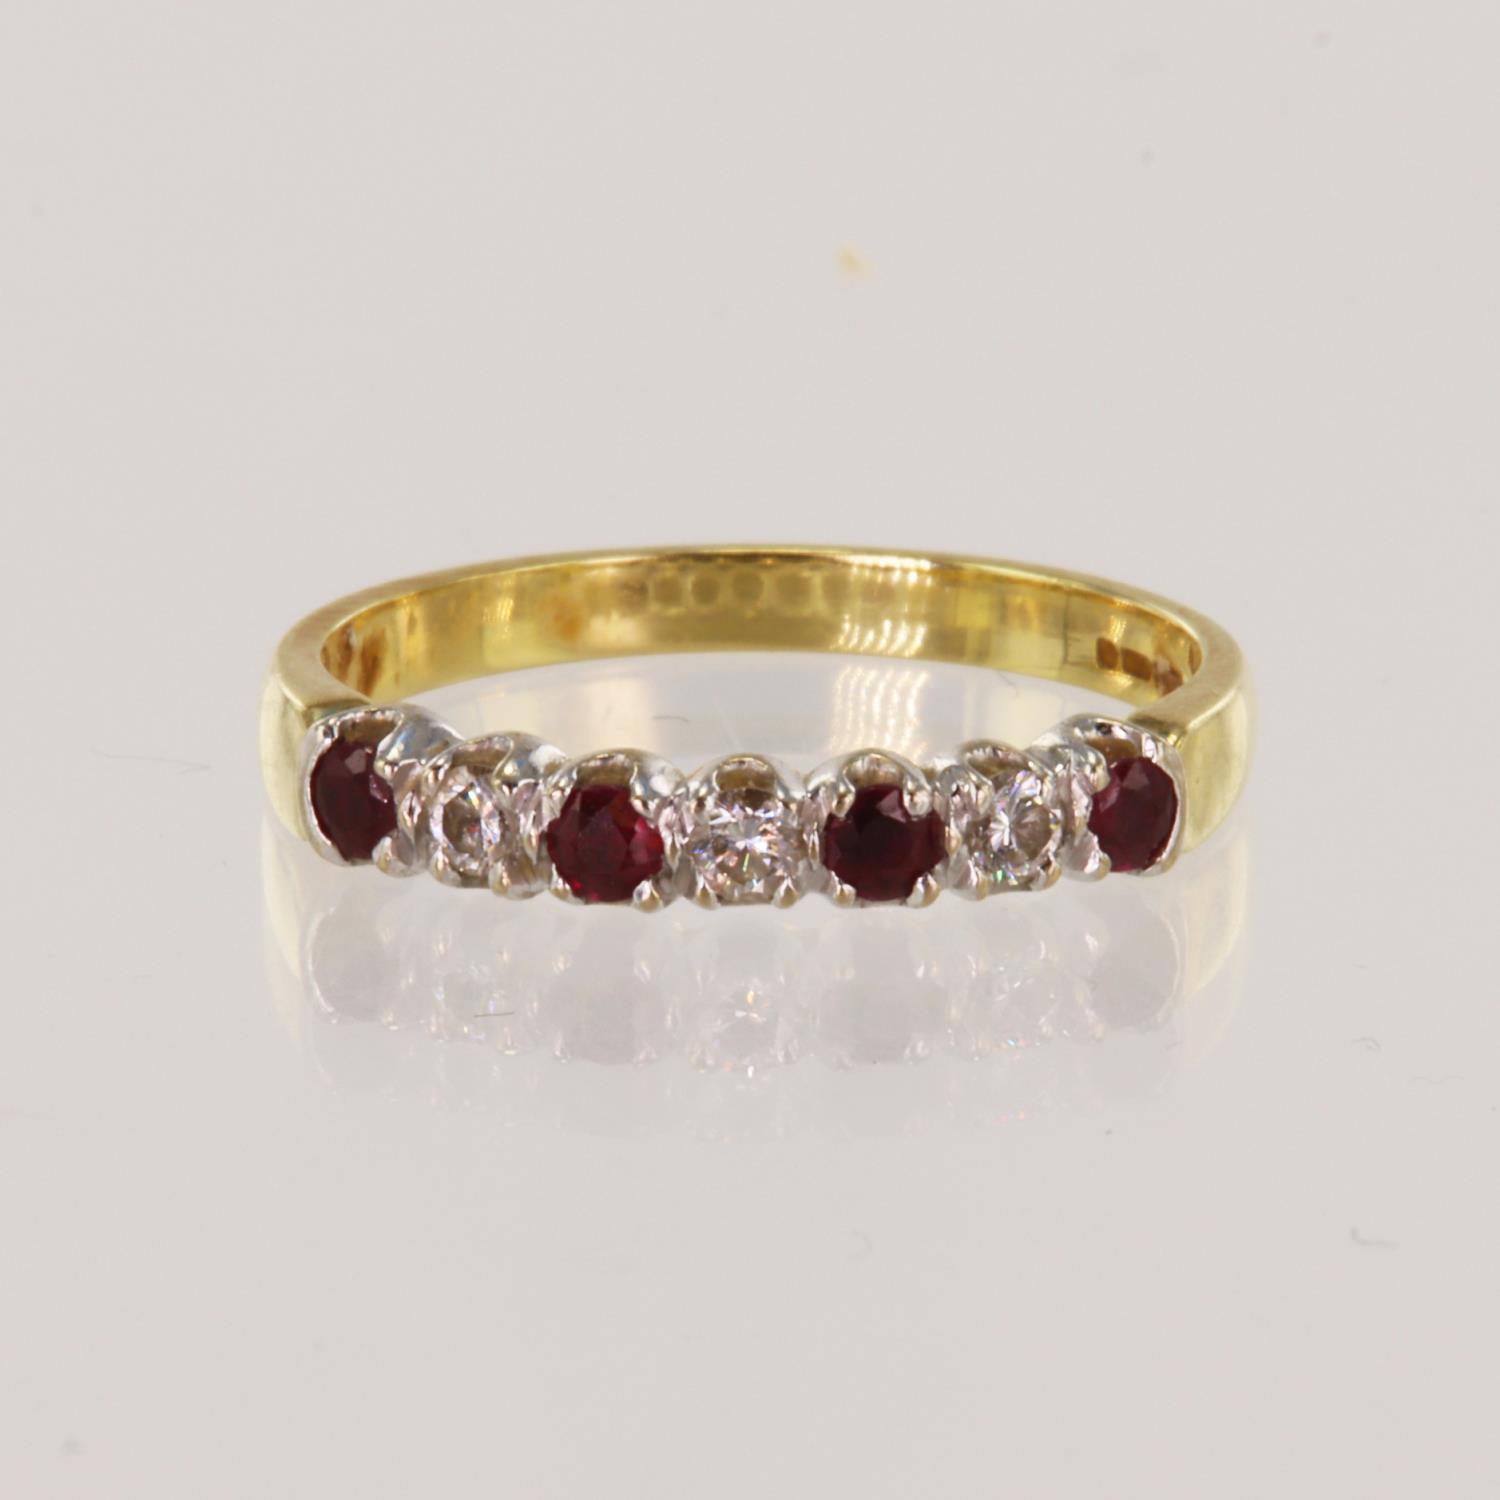 18ct yellow gold diamond and ruby half eternity ring, set with four 2.3mm deep-red round rubies,